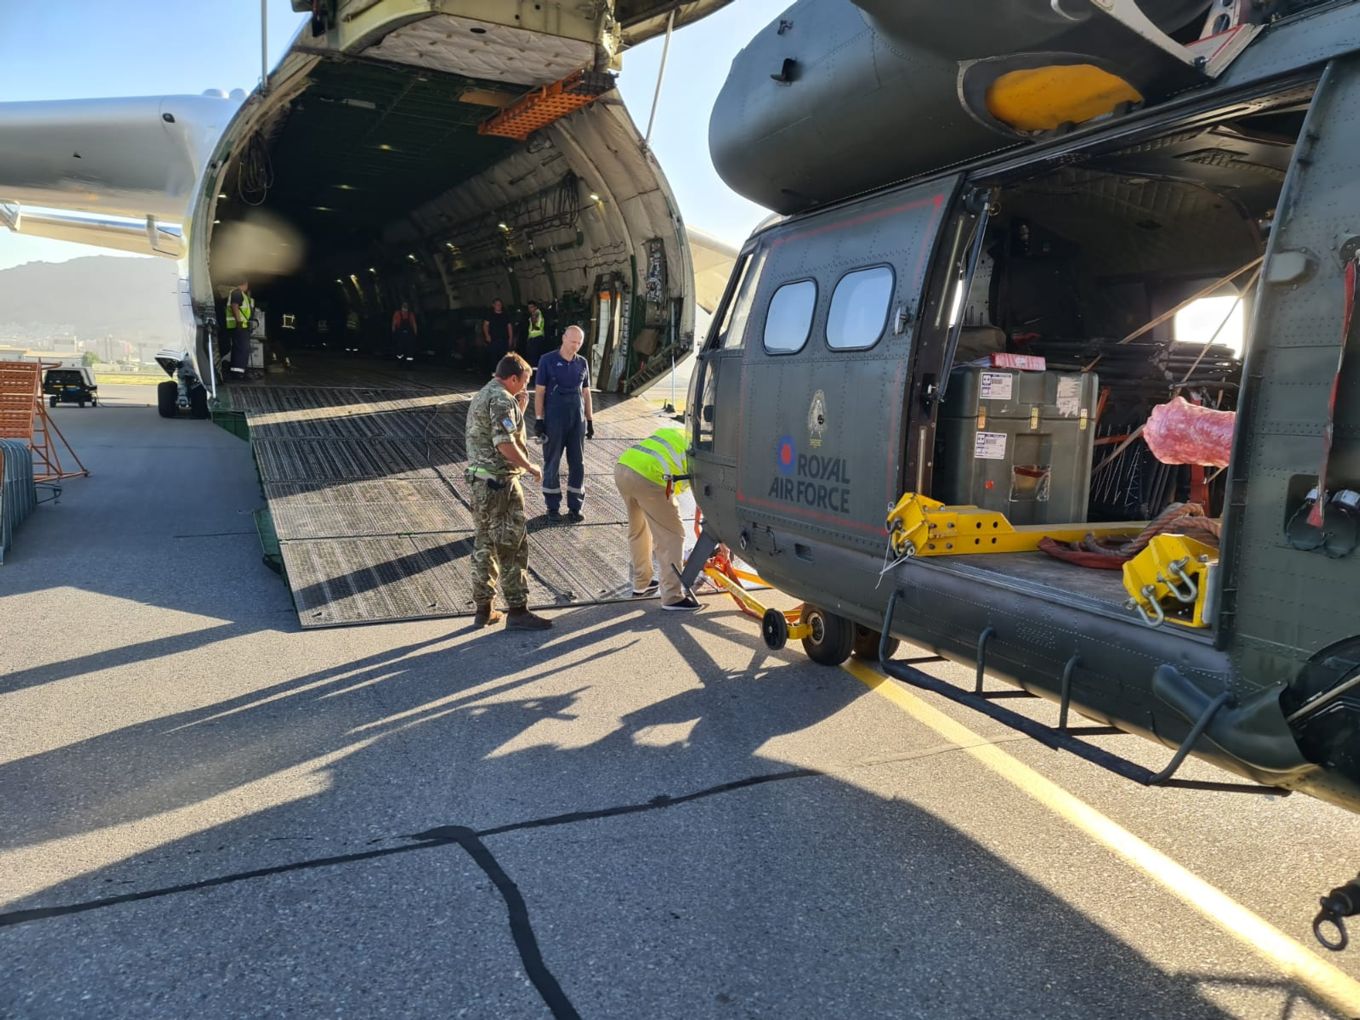 Image shows RAF Puma helicopter being loaded into an Antonov AN-225 aircraft.